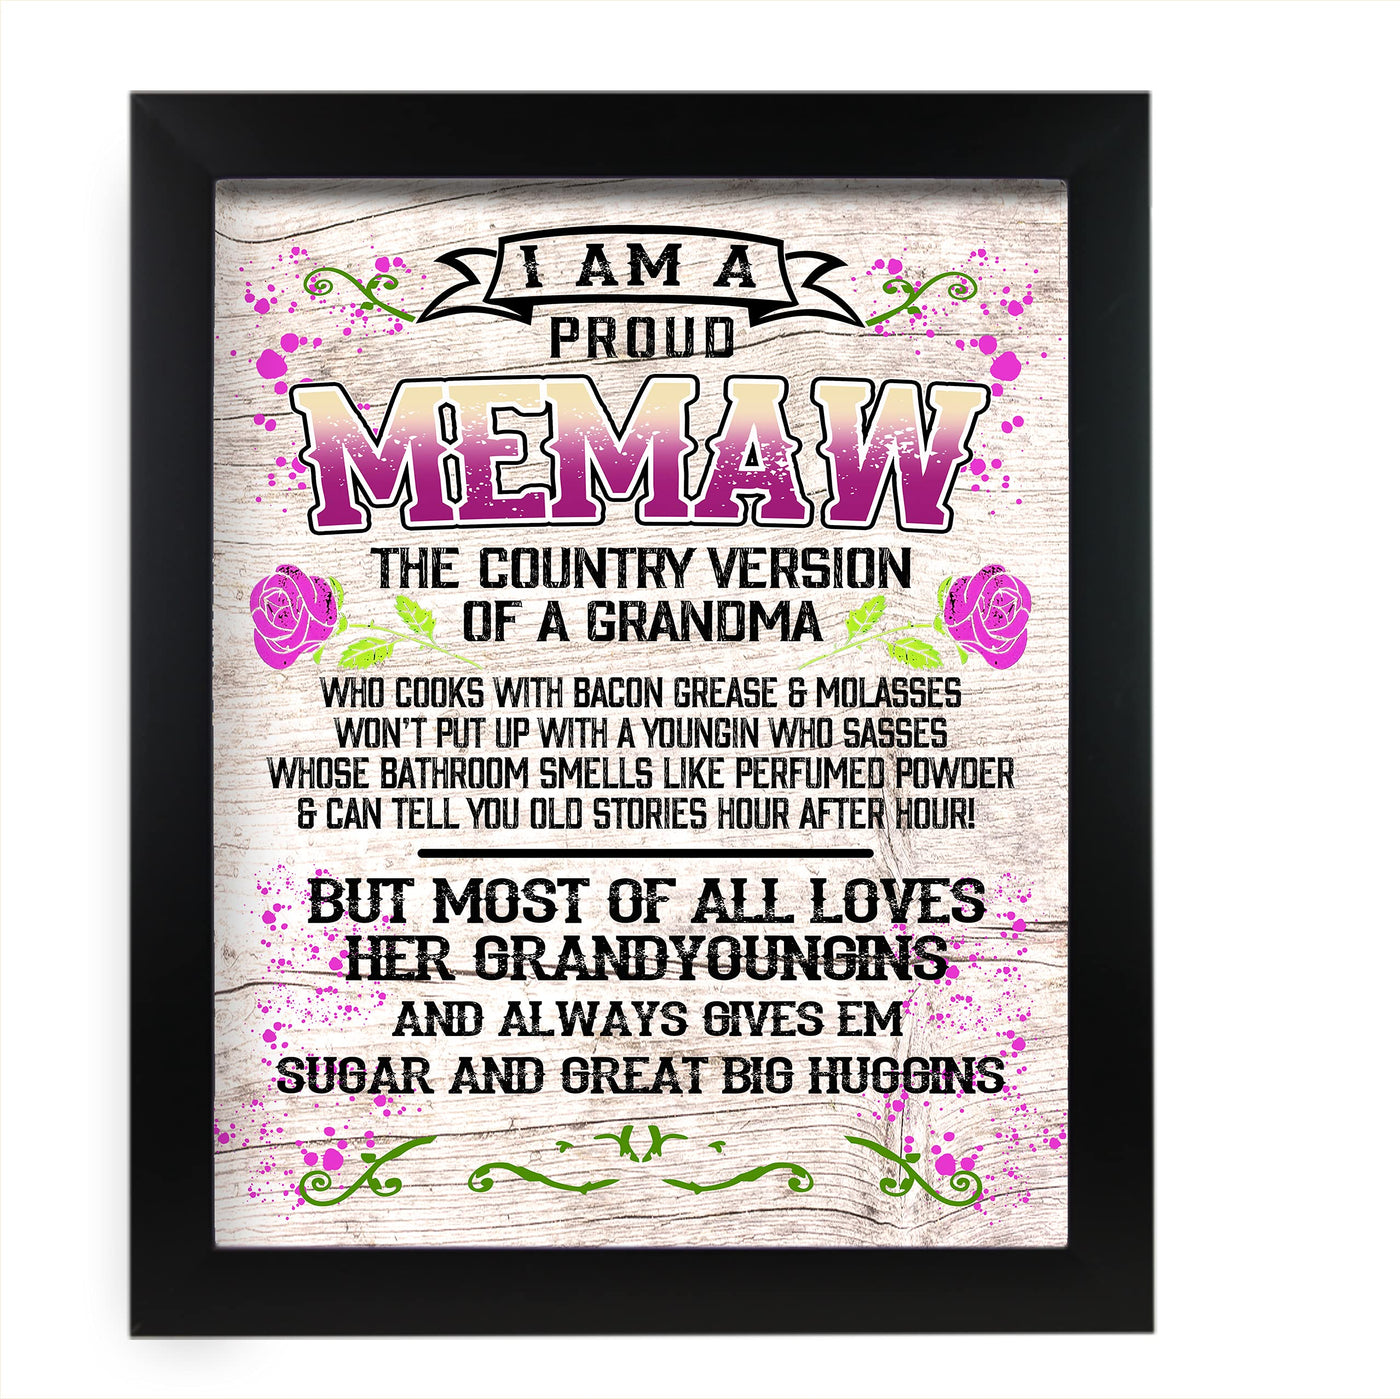 Proud Memaw-Country Version of Grandma Rustic Floral Wall Art -11 x 14" Decorative Farmhouse Print-Ready to Frame. Funny Home-Office-Welcome Decor. Great Gift for Grandmas! Printed on Photo Paper.